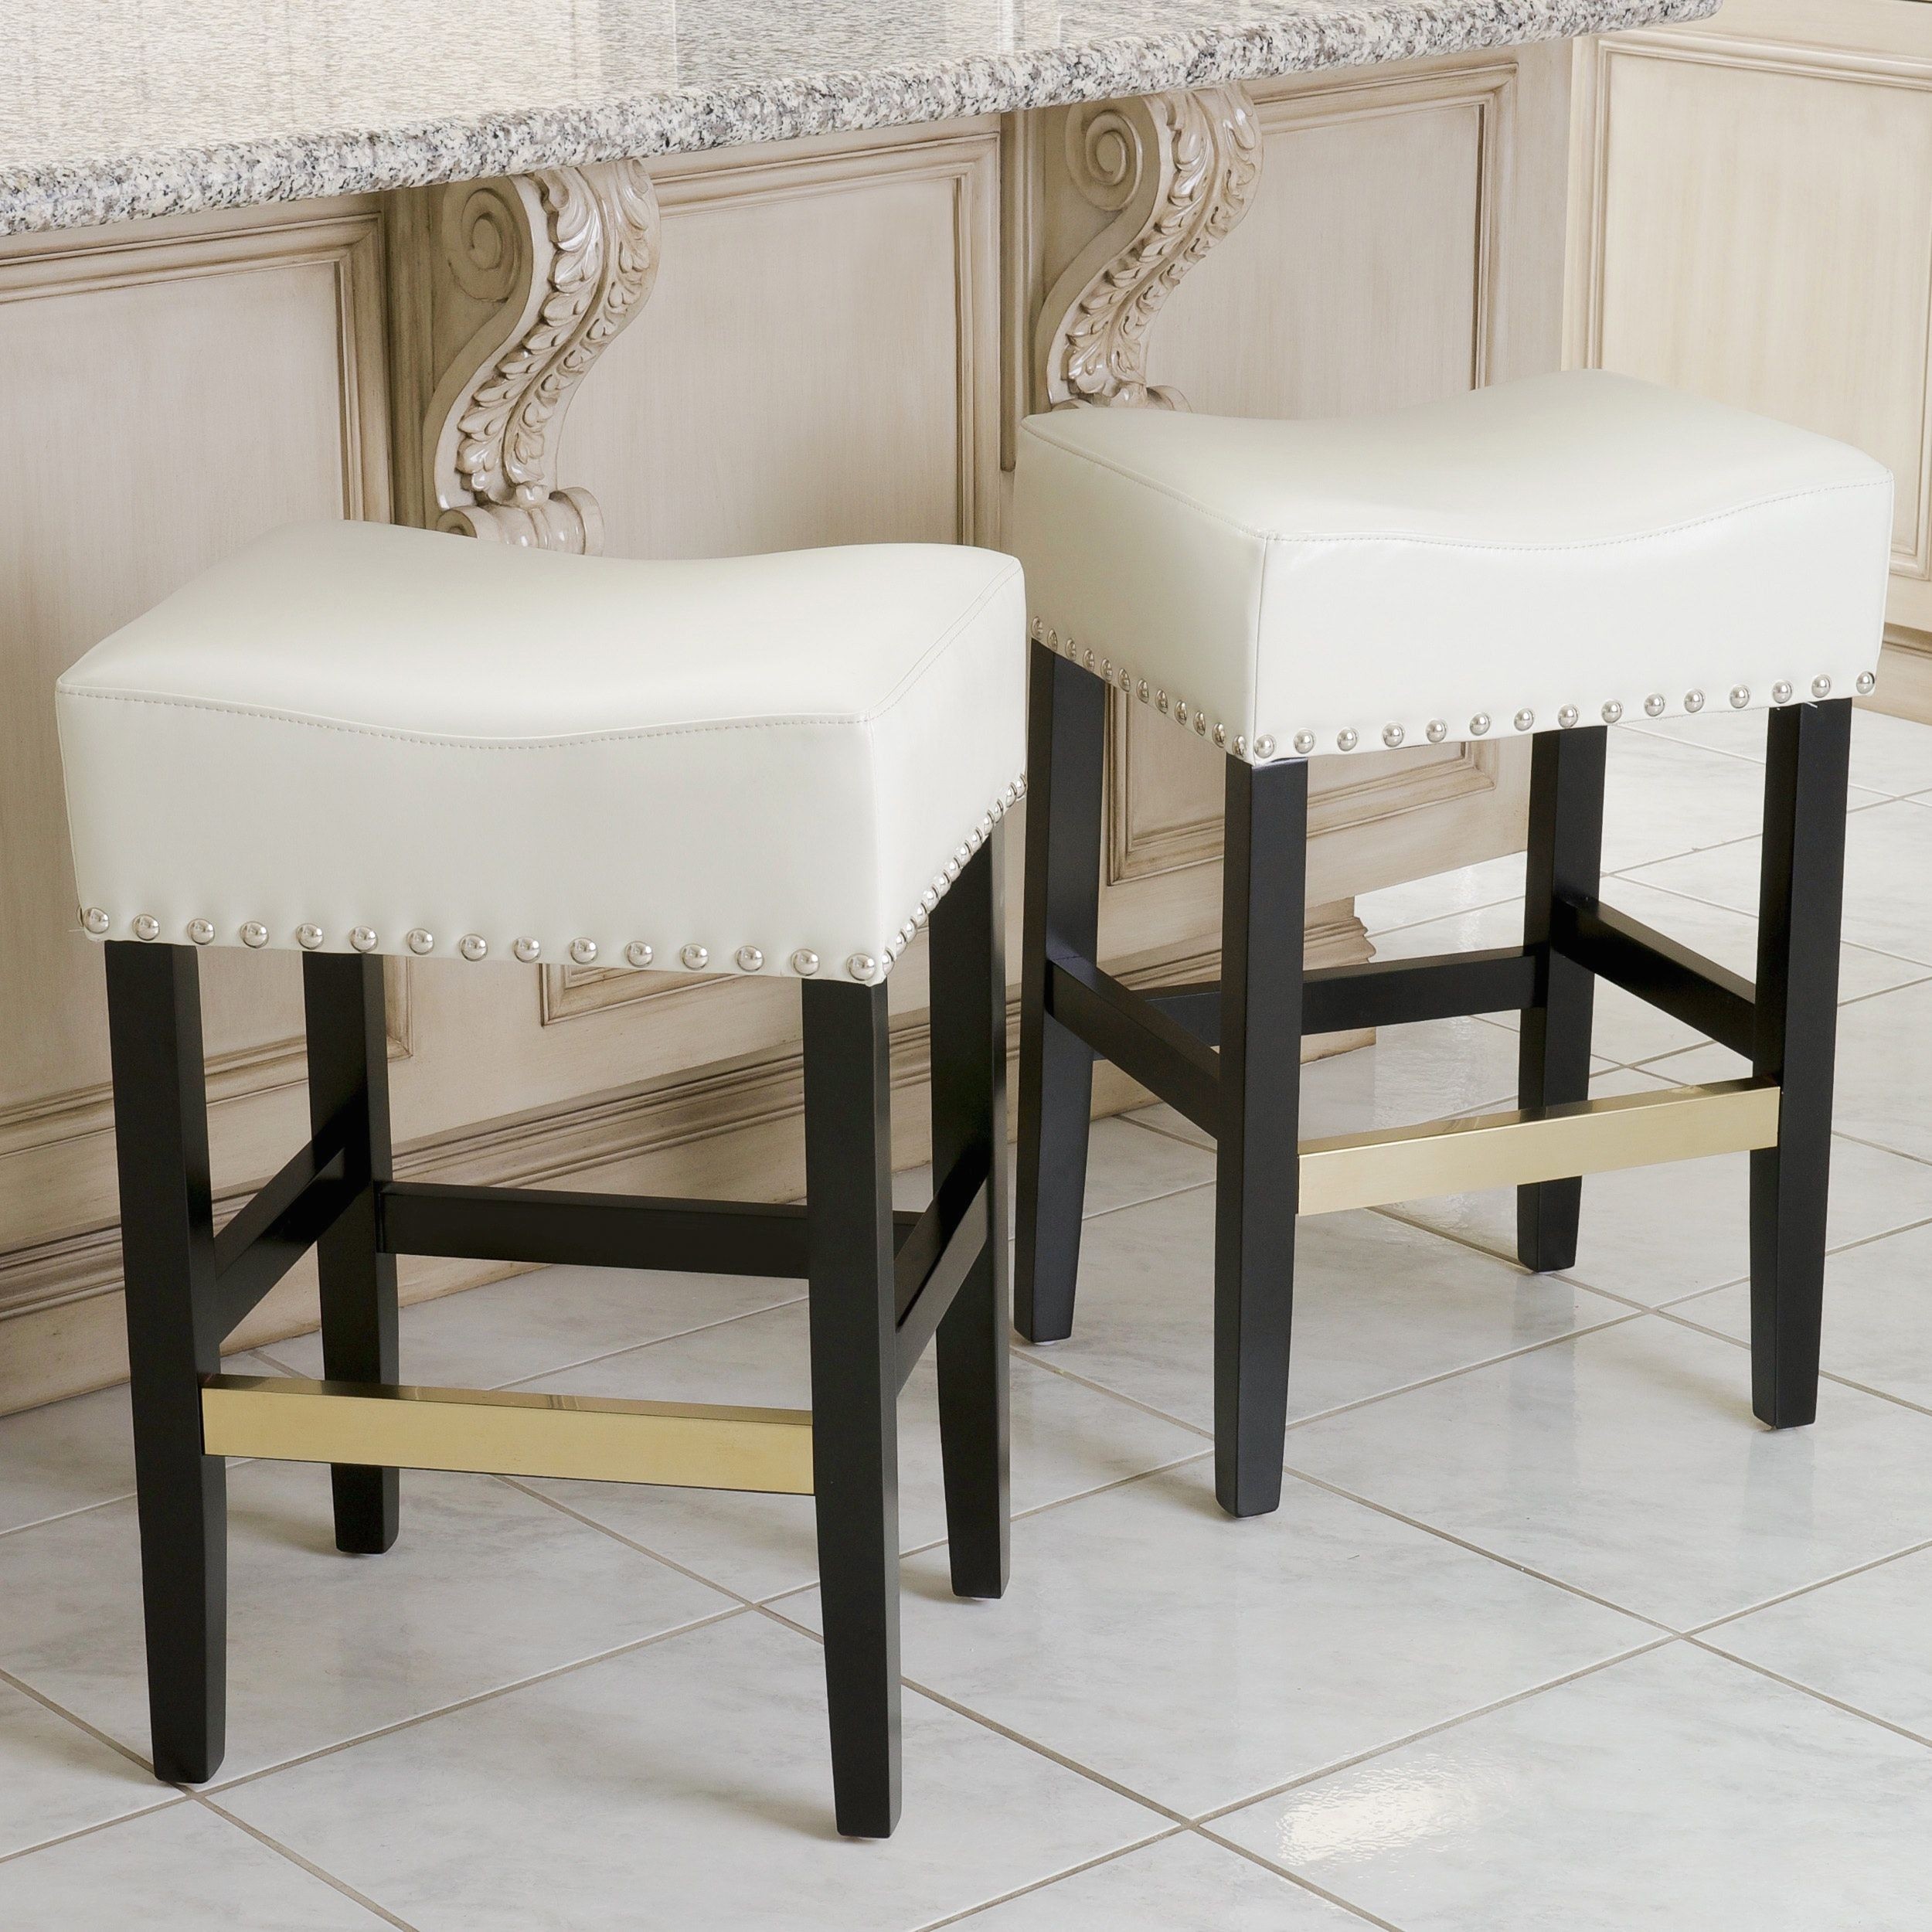 Christopher Knight Home Louigi Ivory Leather Backless Counter Stools Set Of 2